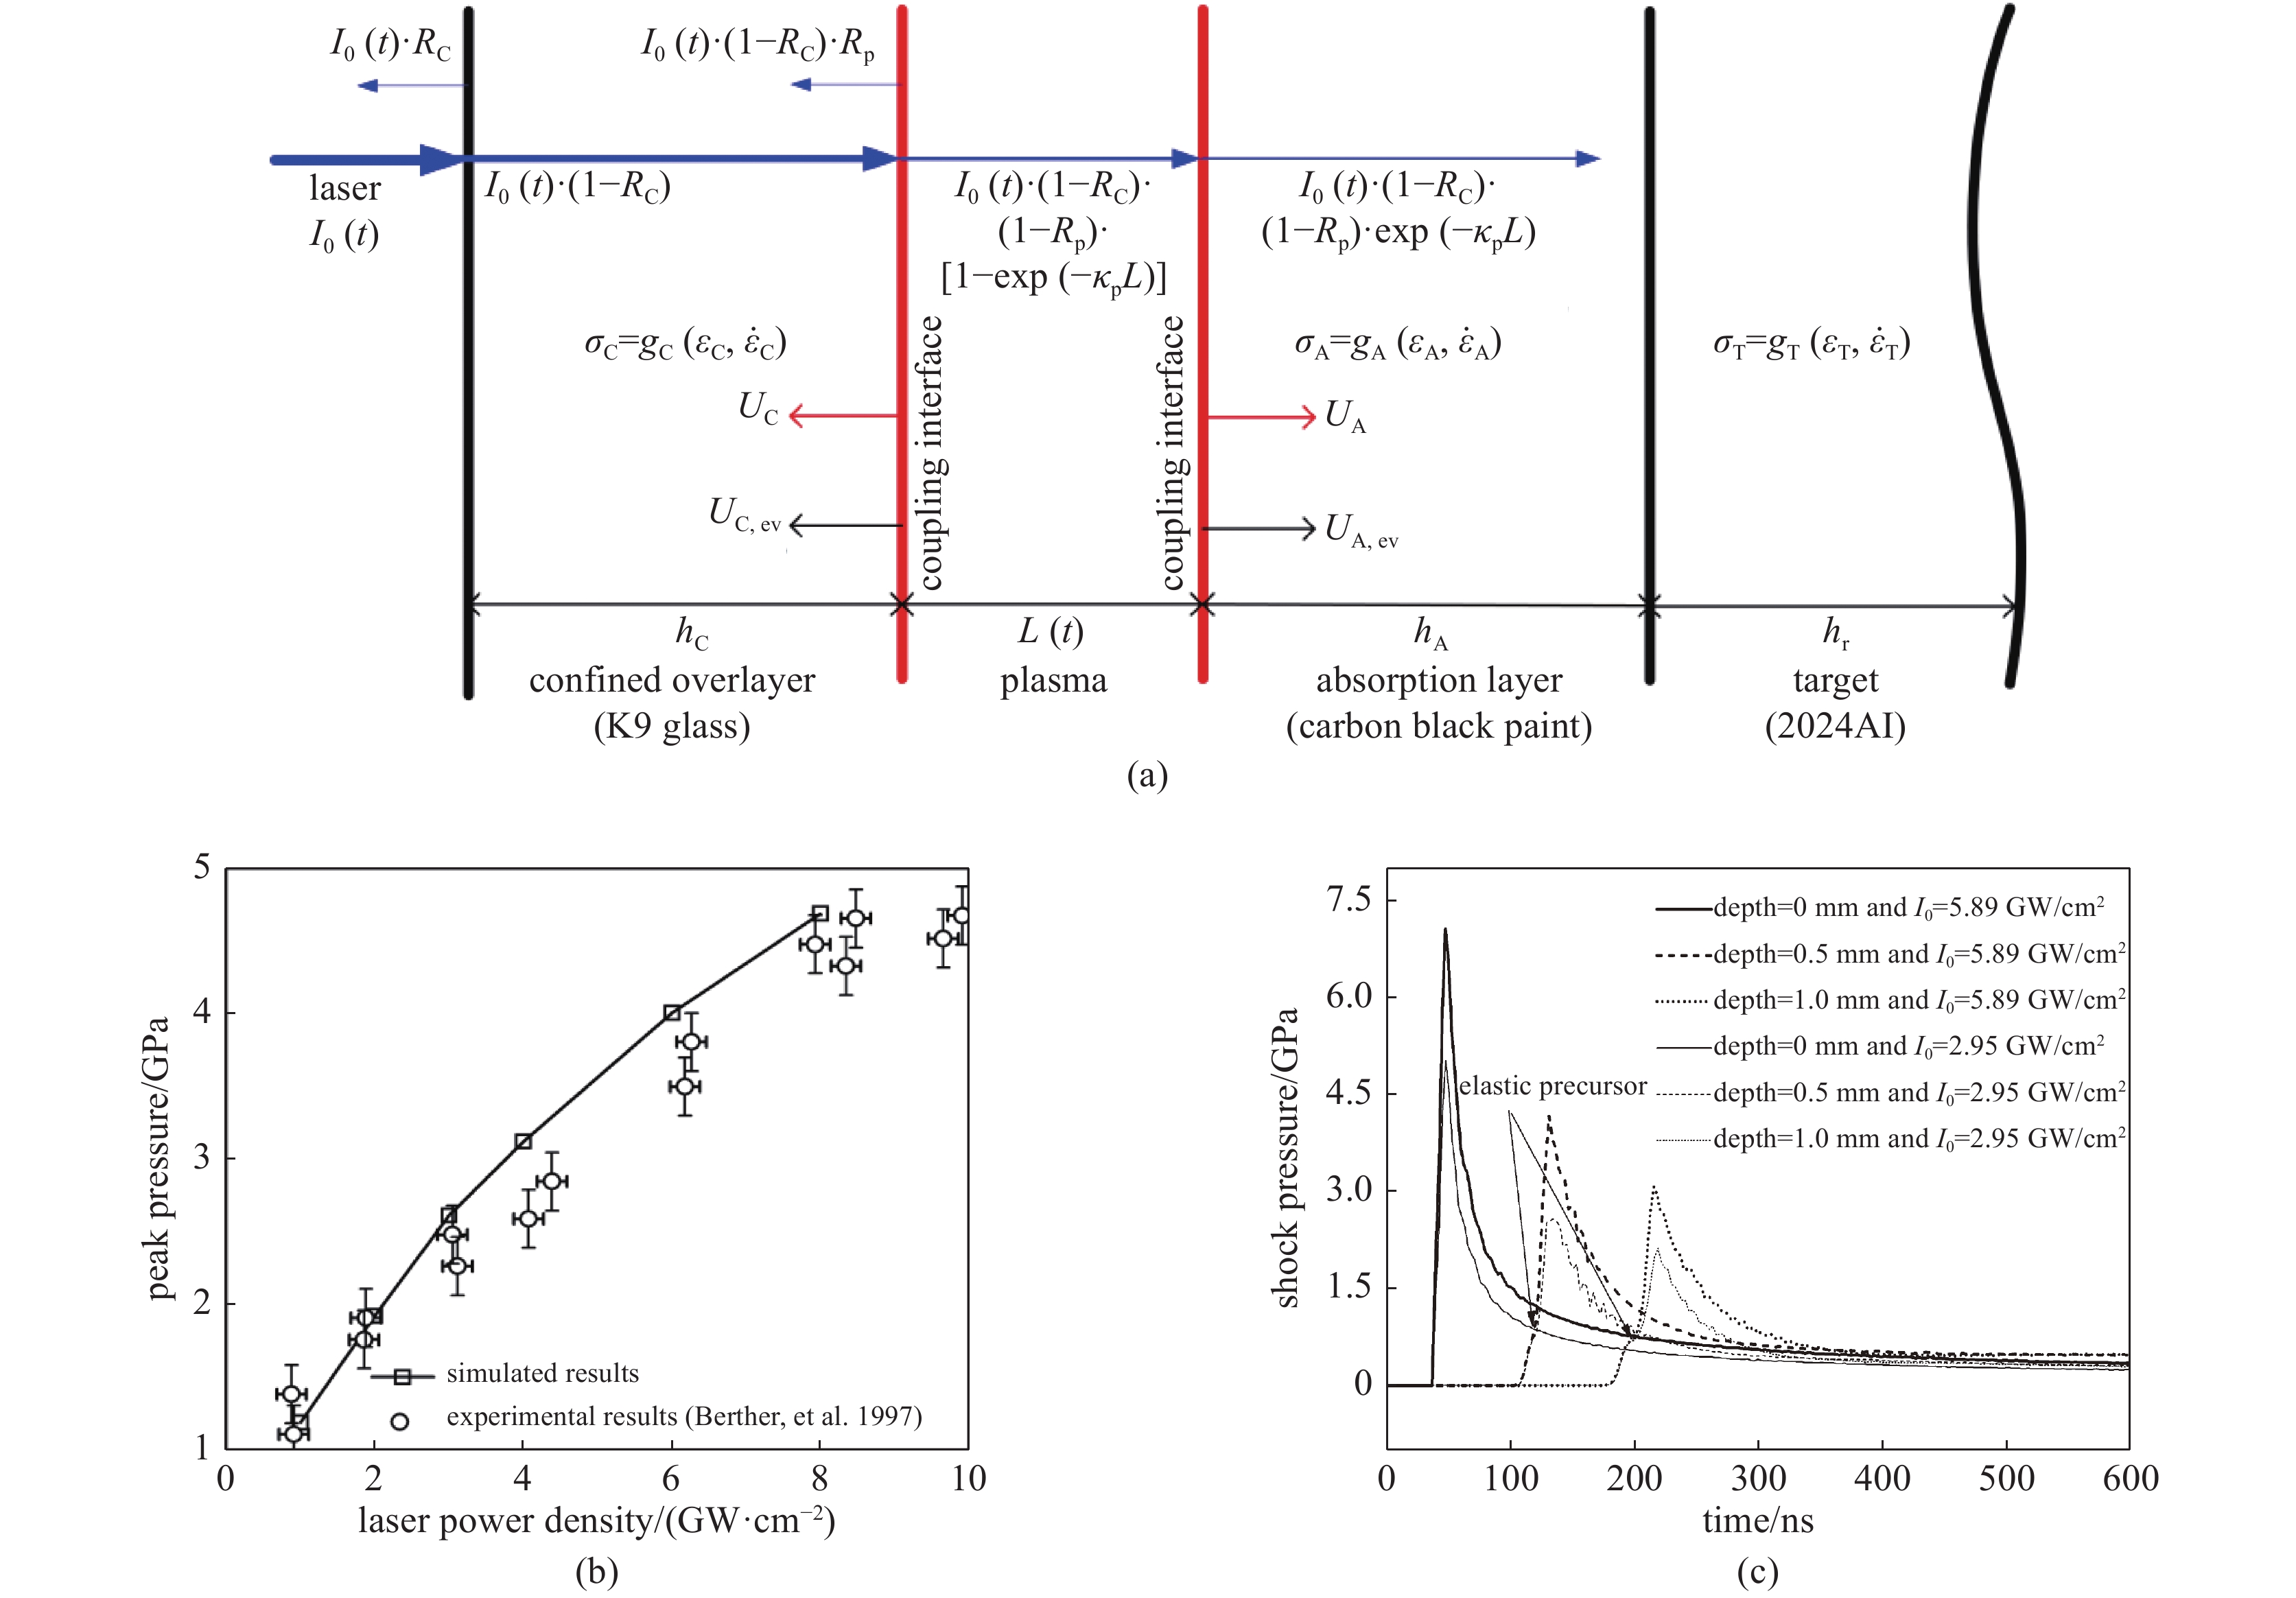 (a) One-dimensional coupling analytical model for laser driven explosion and shock wave. (b) Relationship between peak pressure and laser power density. (c) Laser-induced shock wave propagation and attenuation[19]